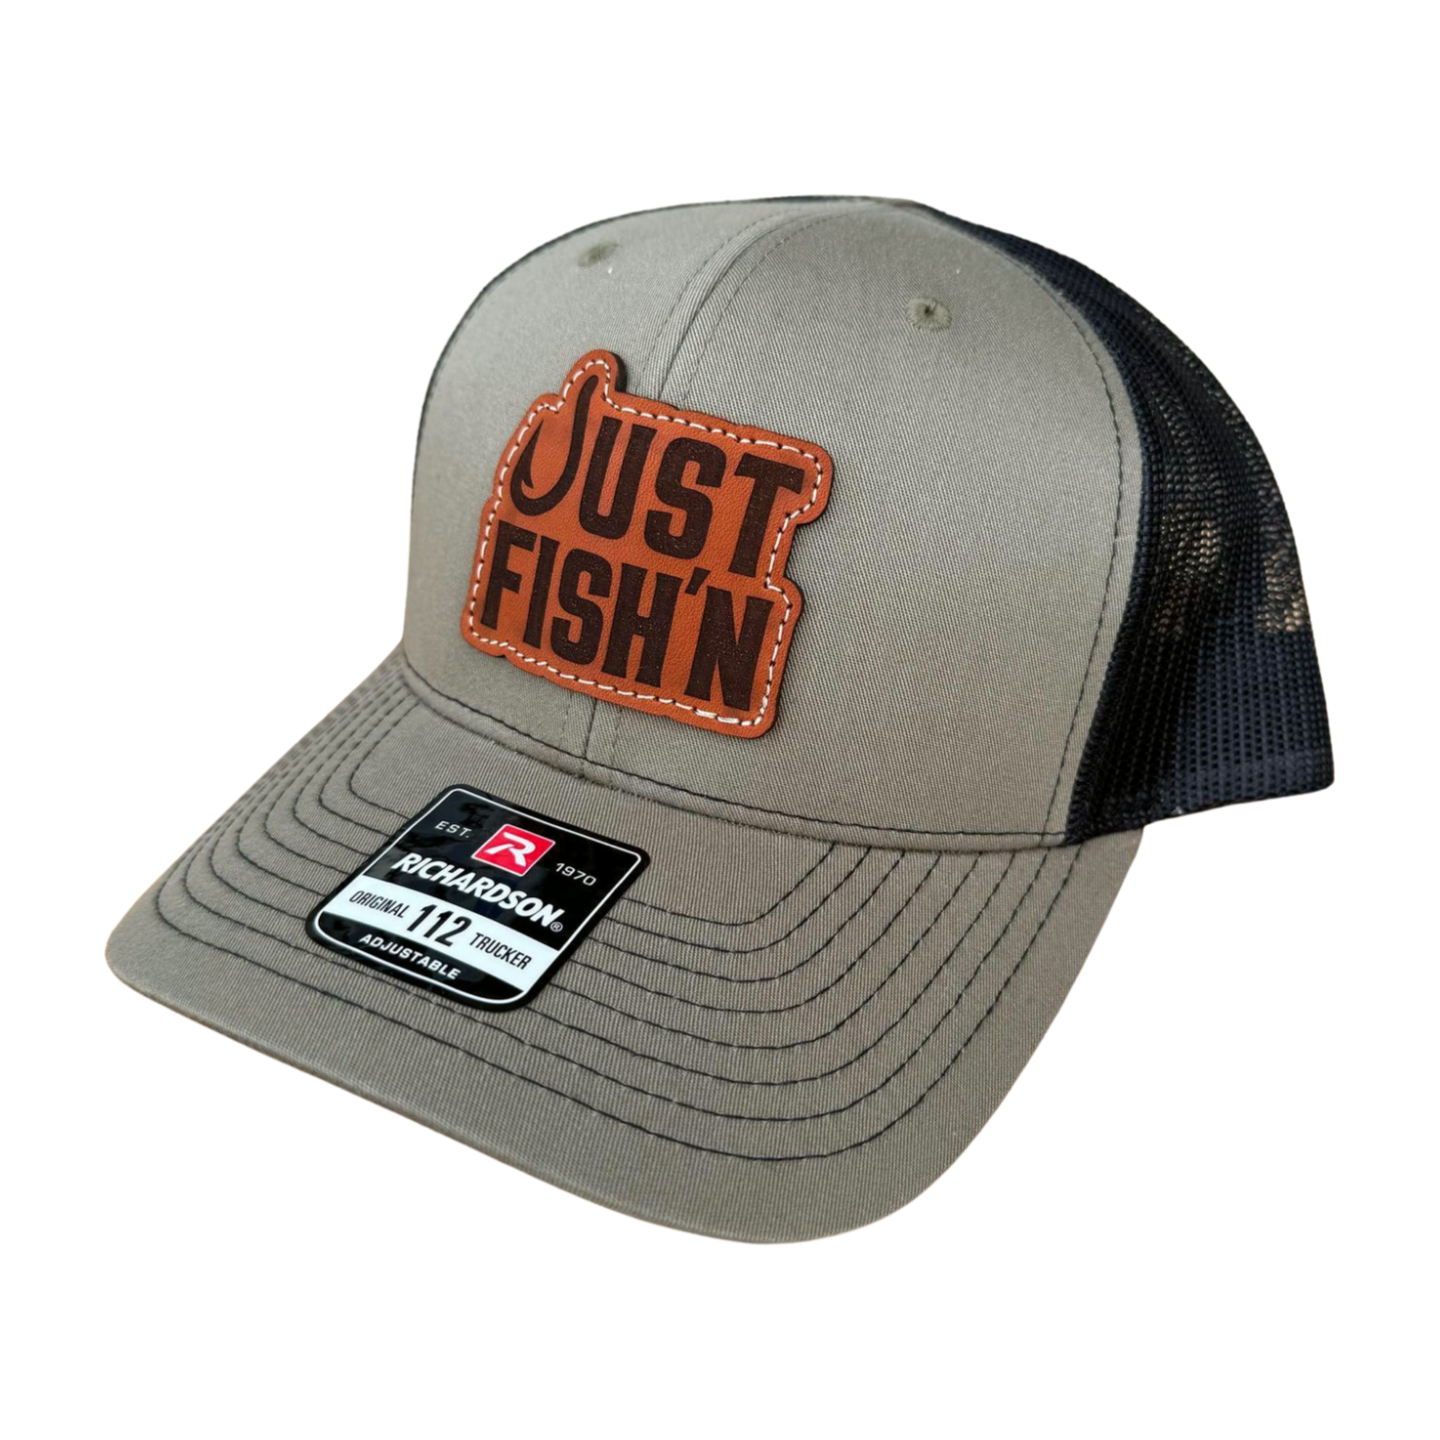 Just Fish'n Leather Patch Hat